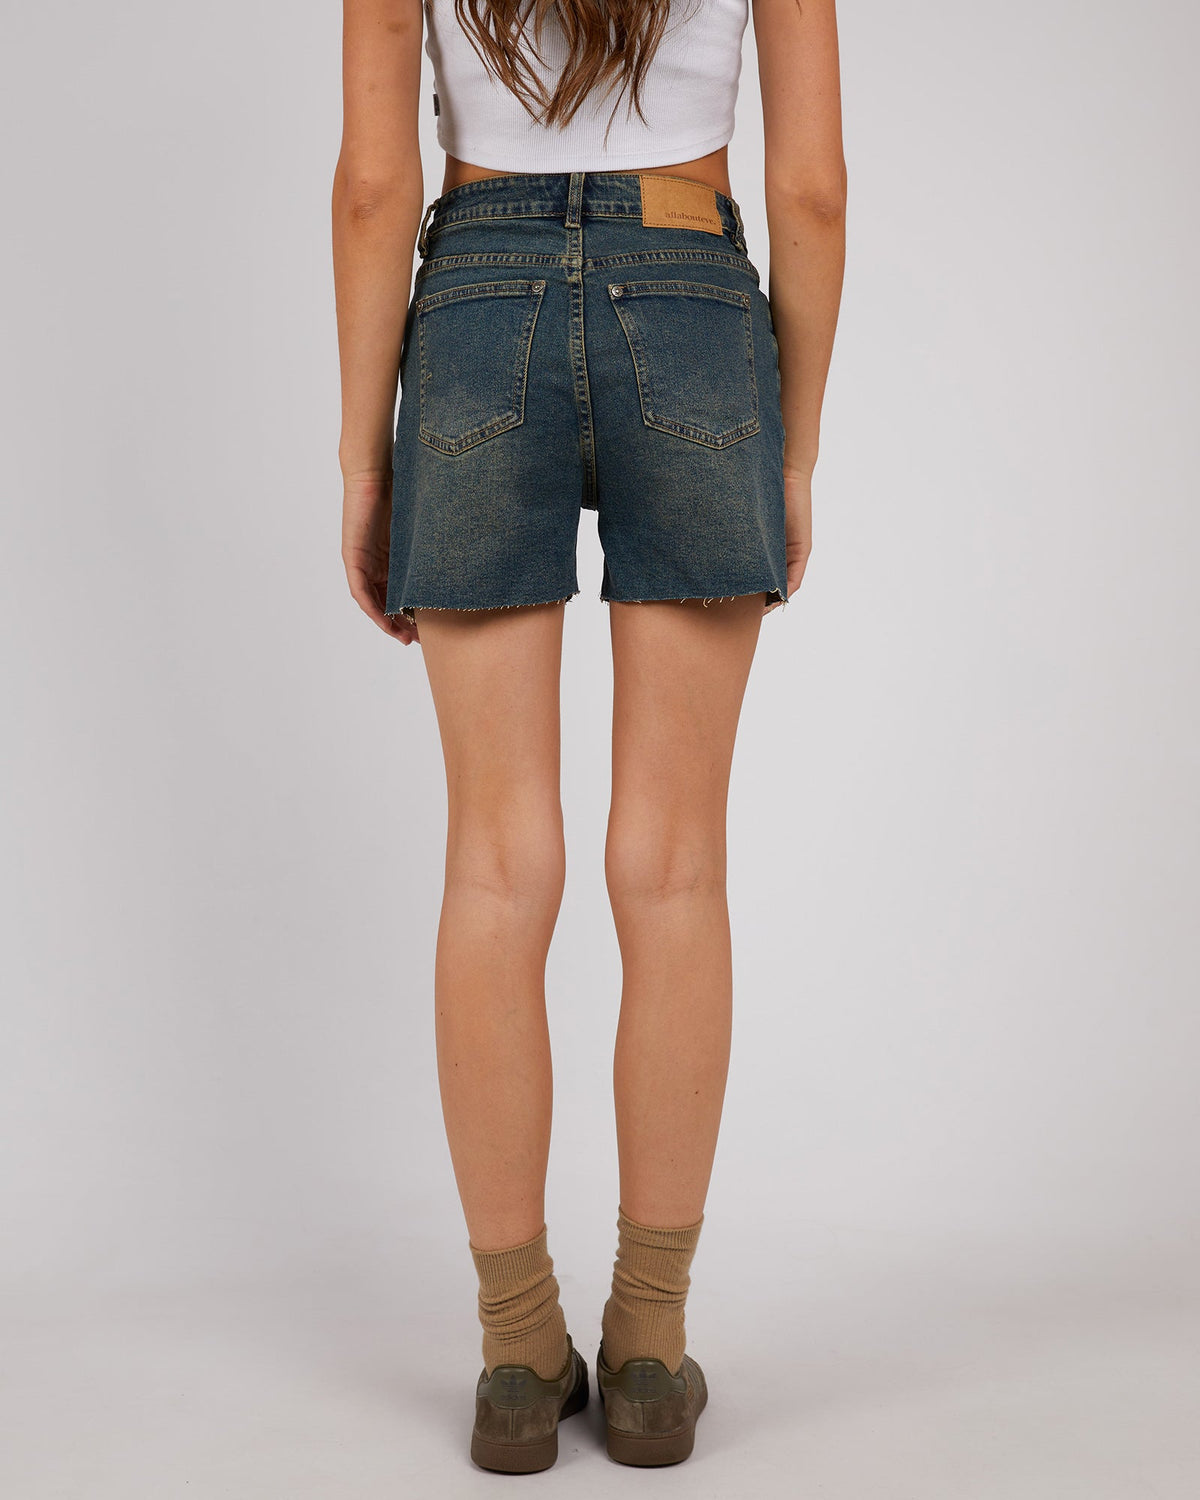 All About Eve-Bobby Cut Off Short Dirty Denim-Edge Clothing